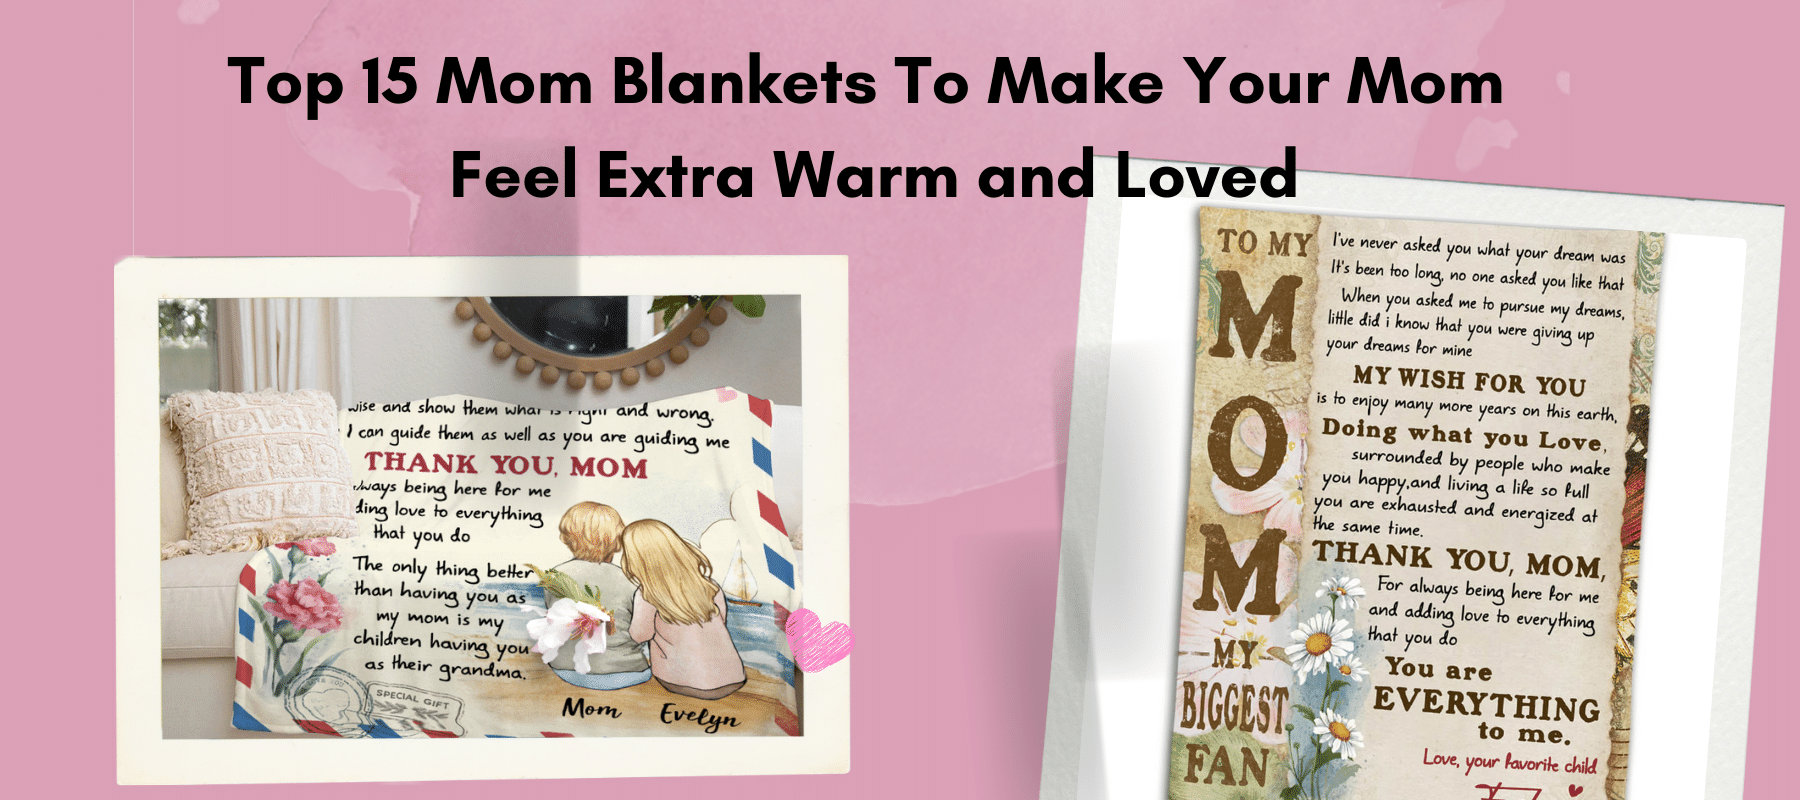 Top 15 Mom Blankets To Make Your Mom Feel Extra Warm and Loved